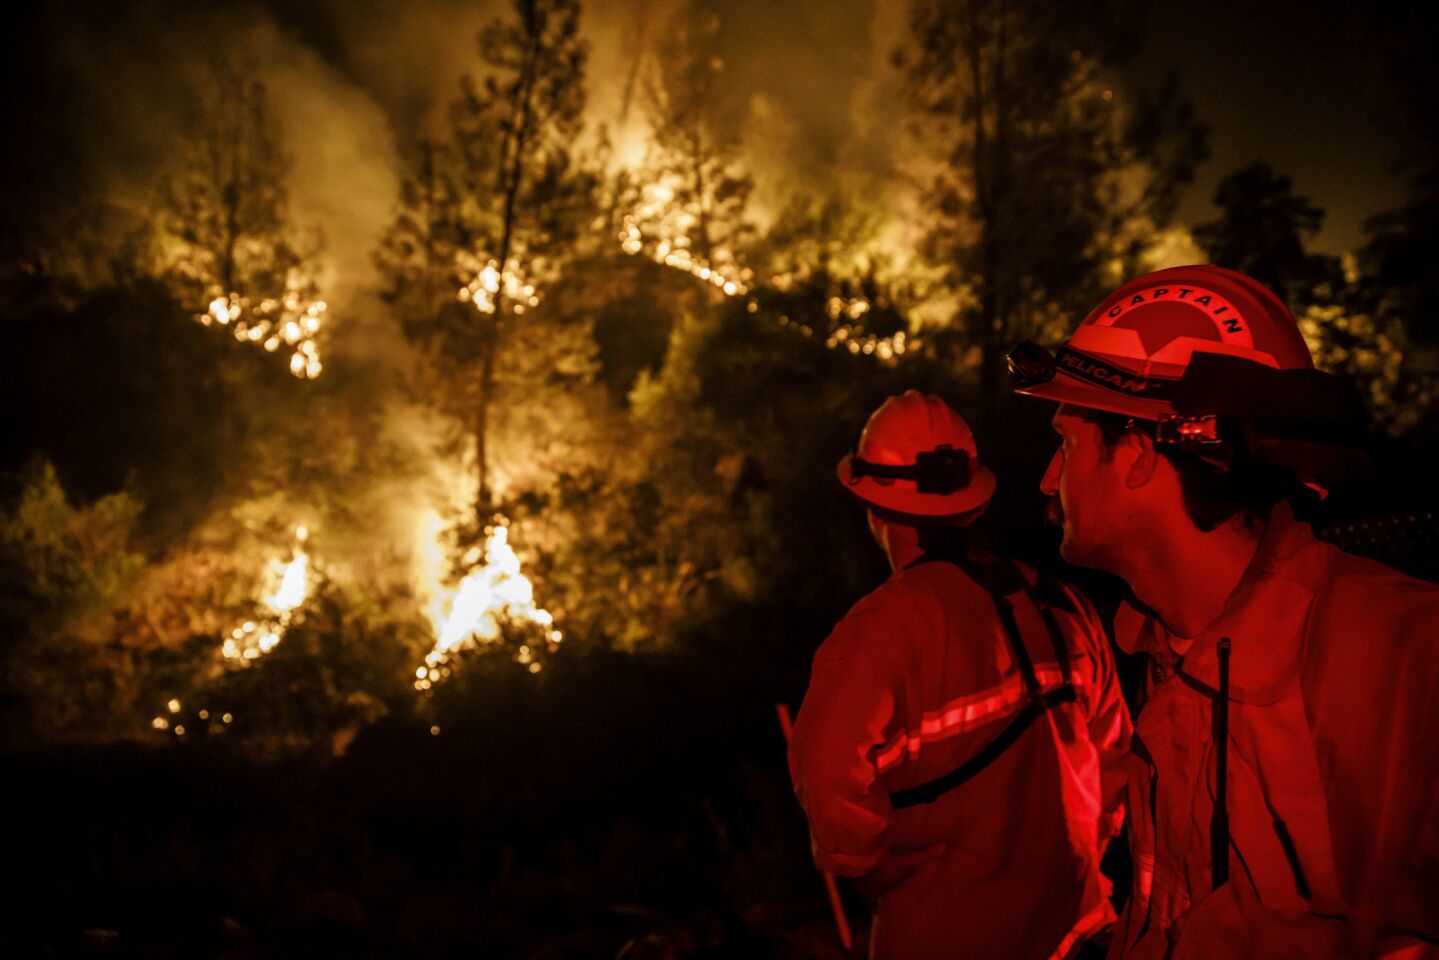 Firefighters keep an eye on a burn operation as part of the battle against the Mendocino Complex blaze on Aug. 7.